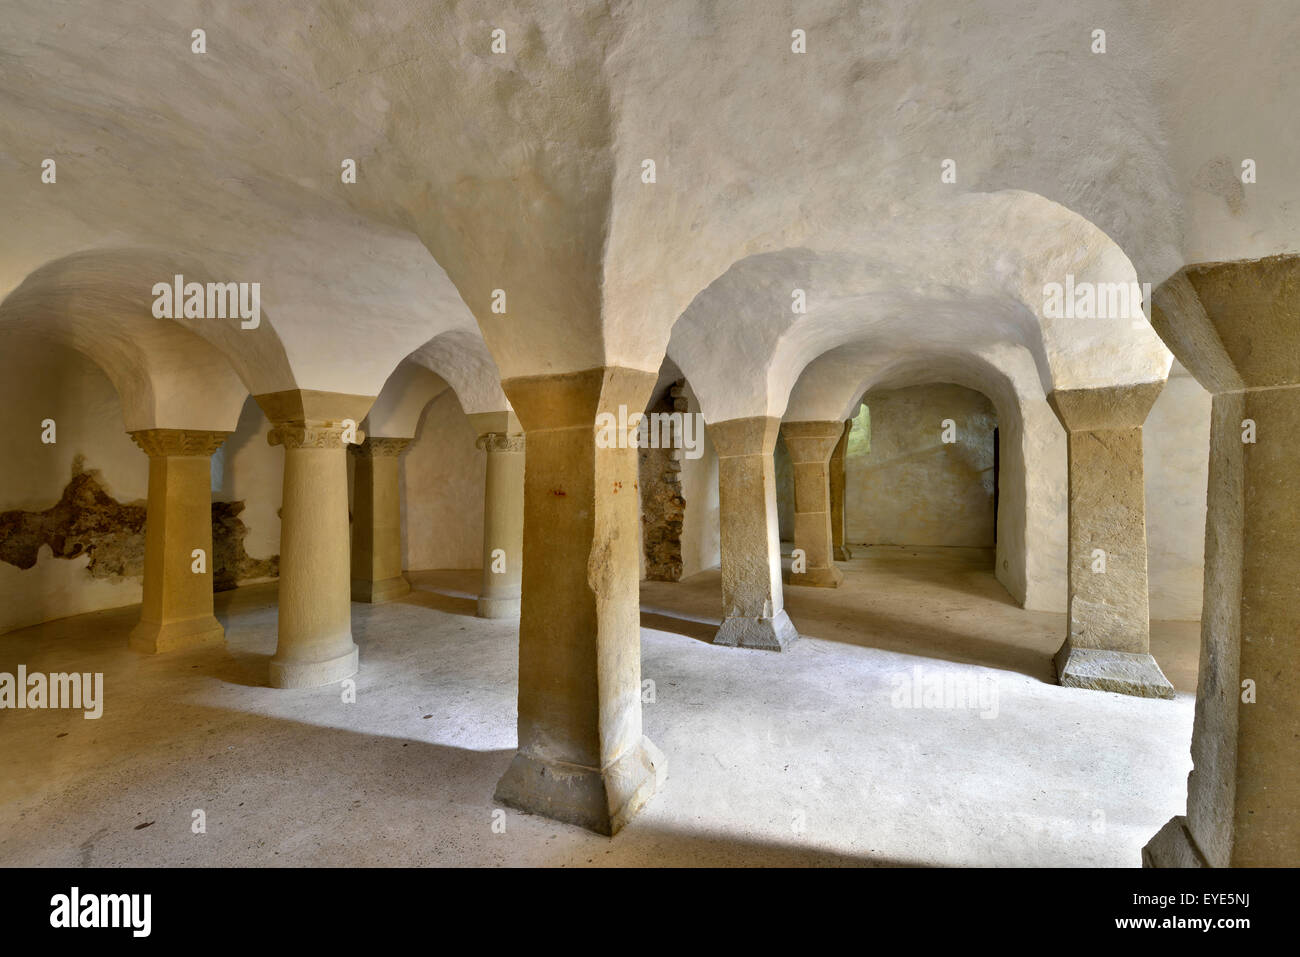 Crypt in the basement of the parsonage, Unterregenbach, Baden-Württemberg, Germany Stock Photo